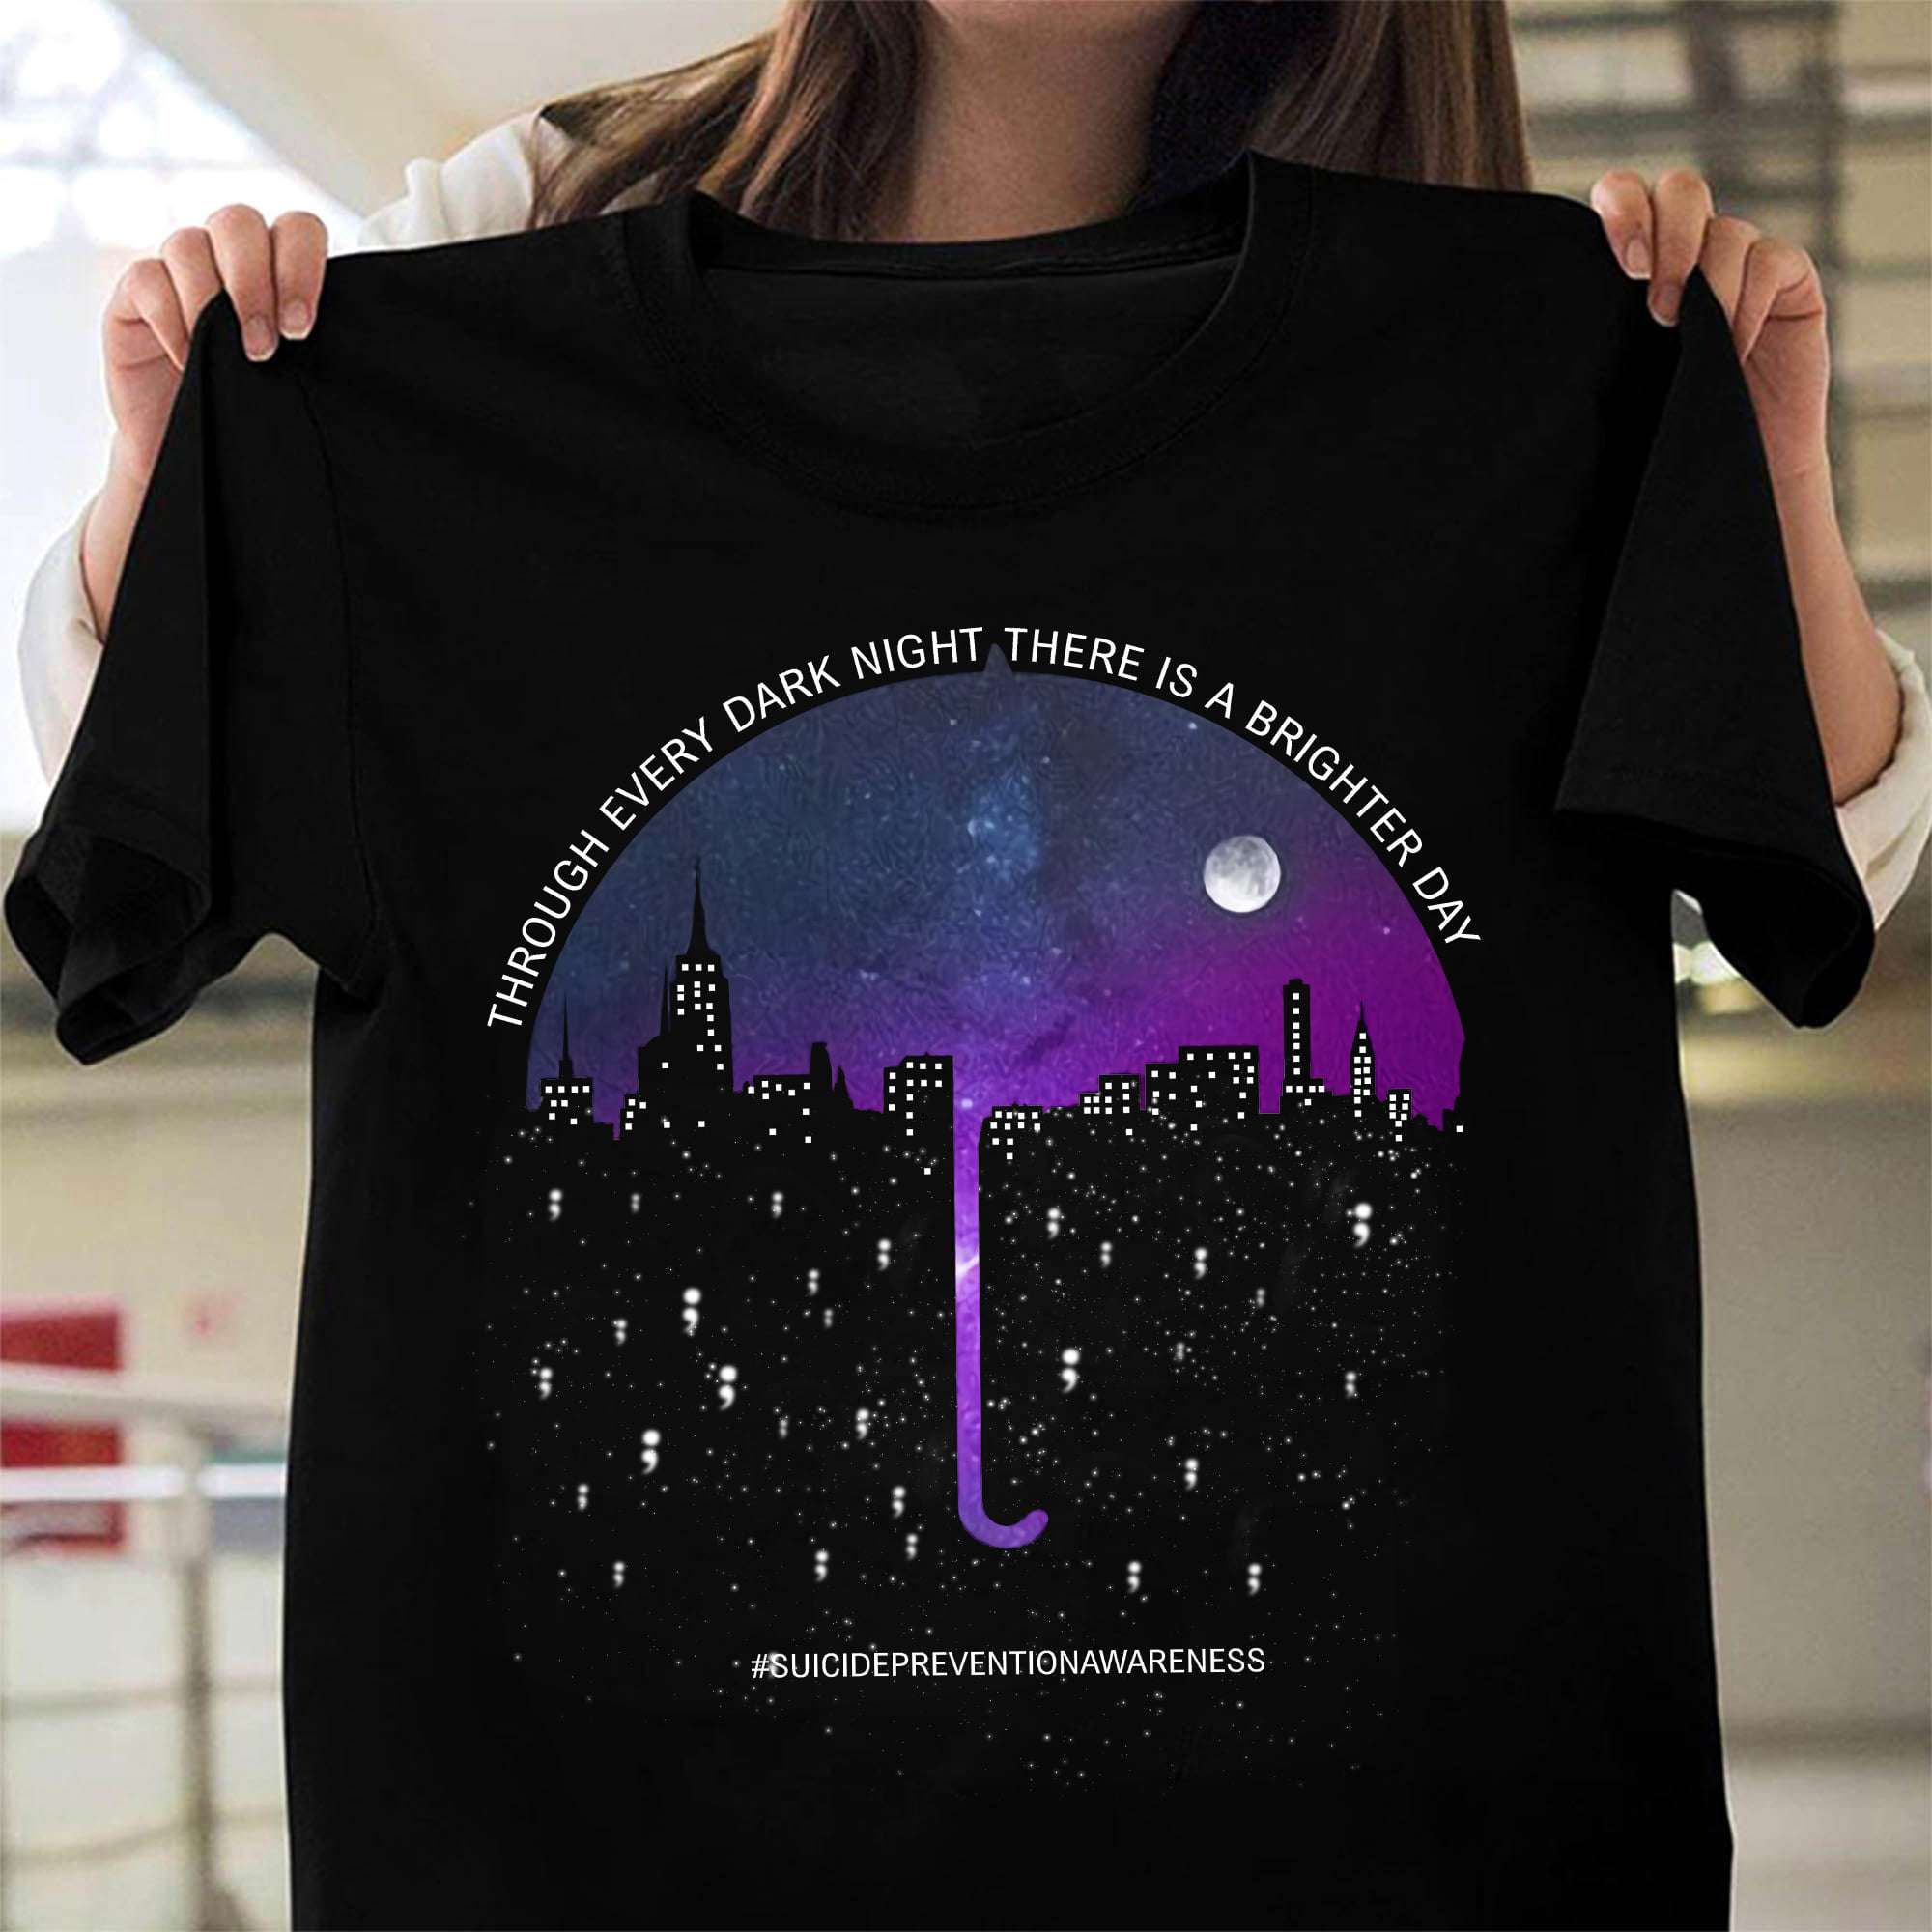 Through every dark night there is a brighter day - Suicide prevention awareness, city umbrella graphic T-shirt